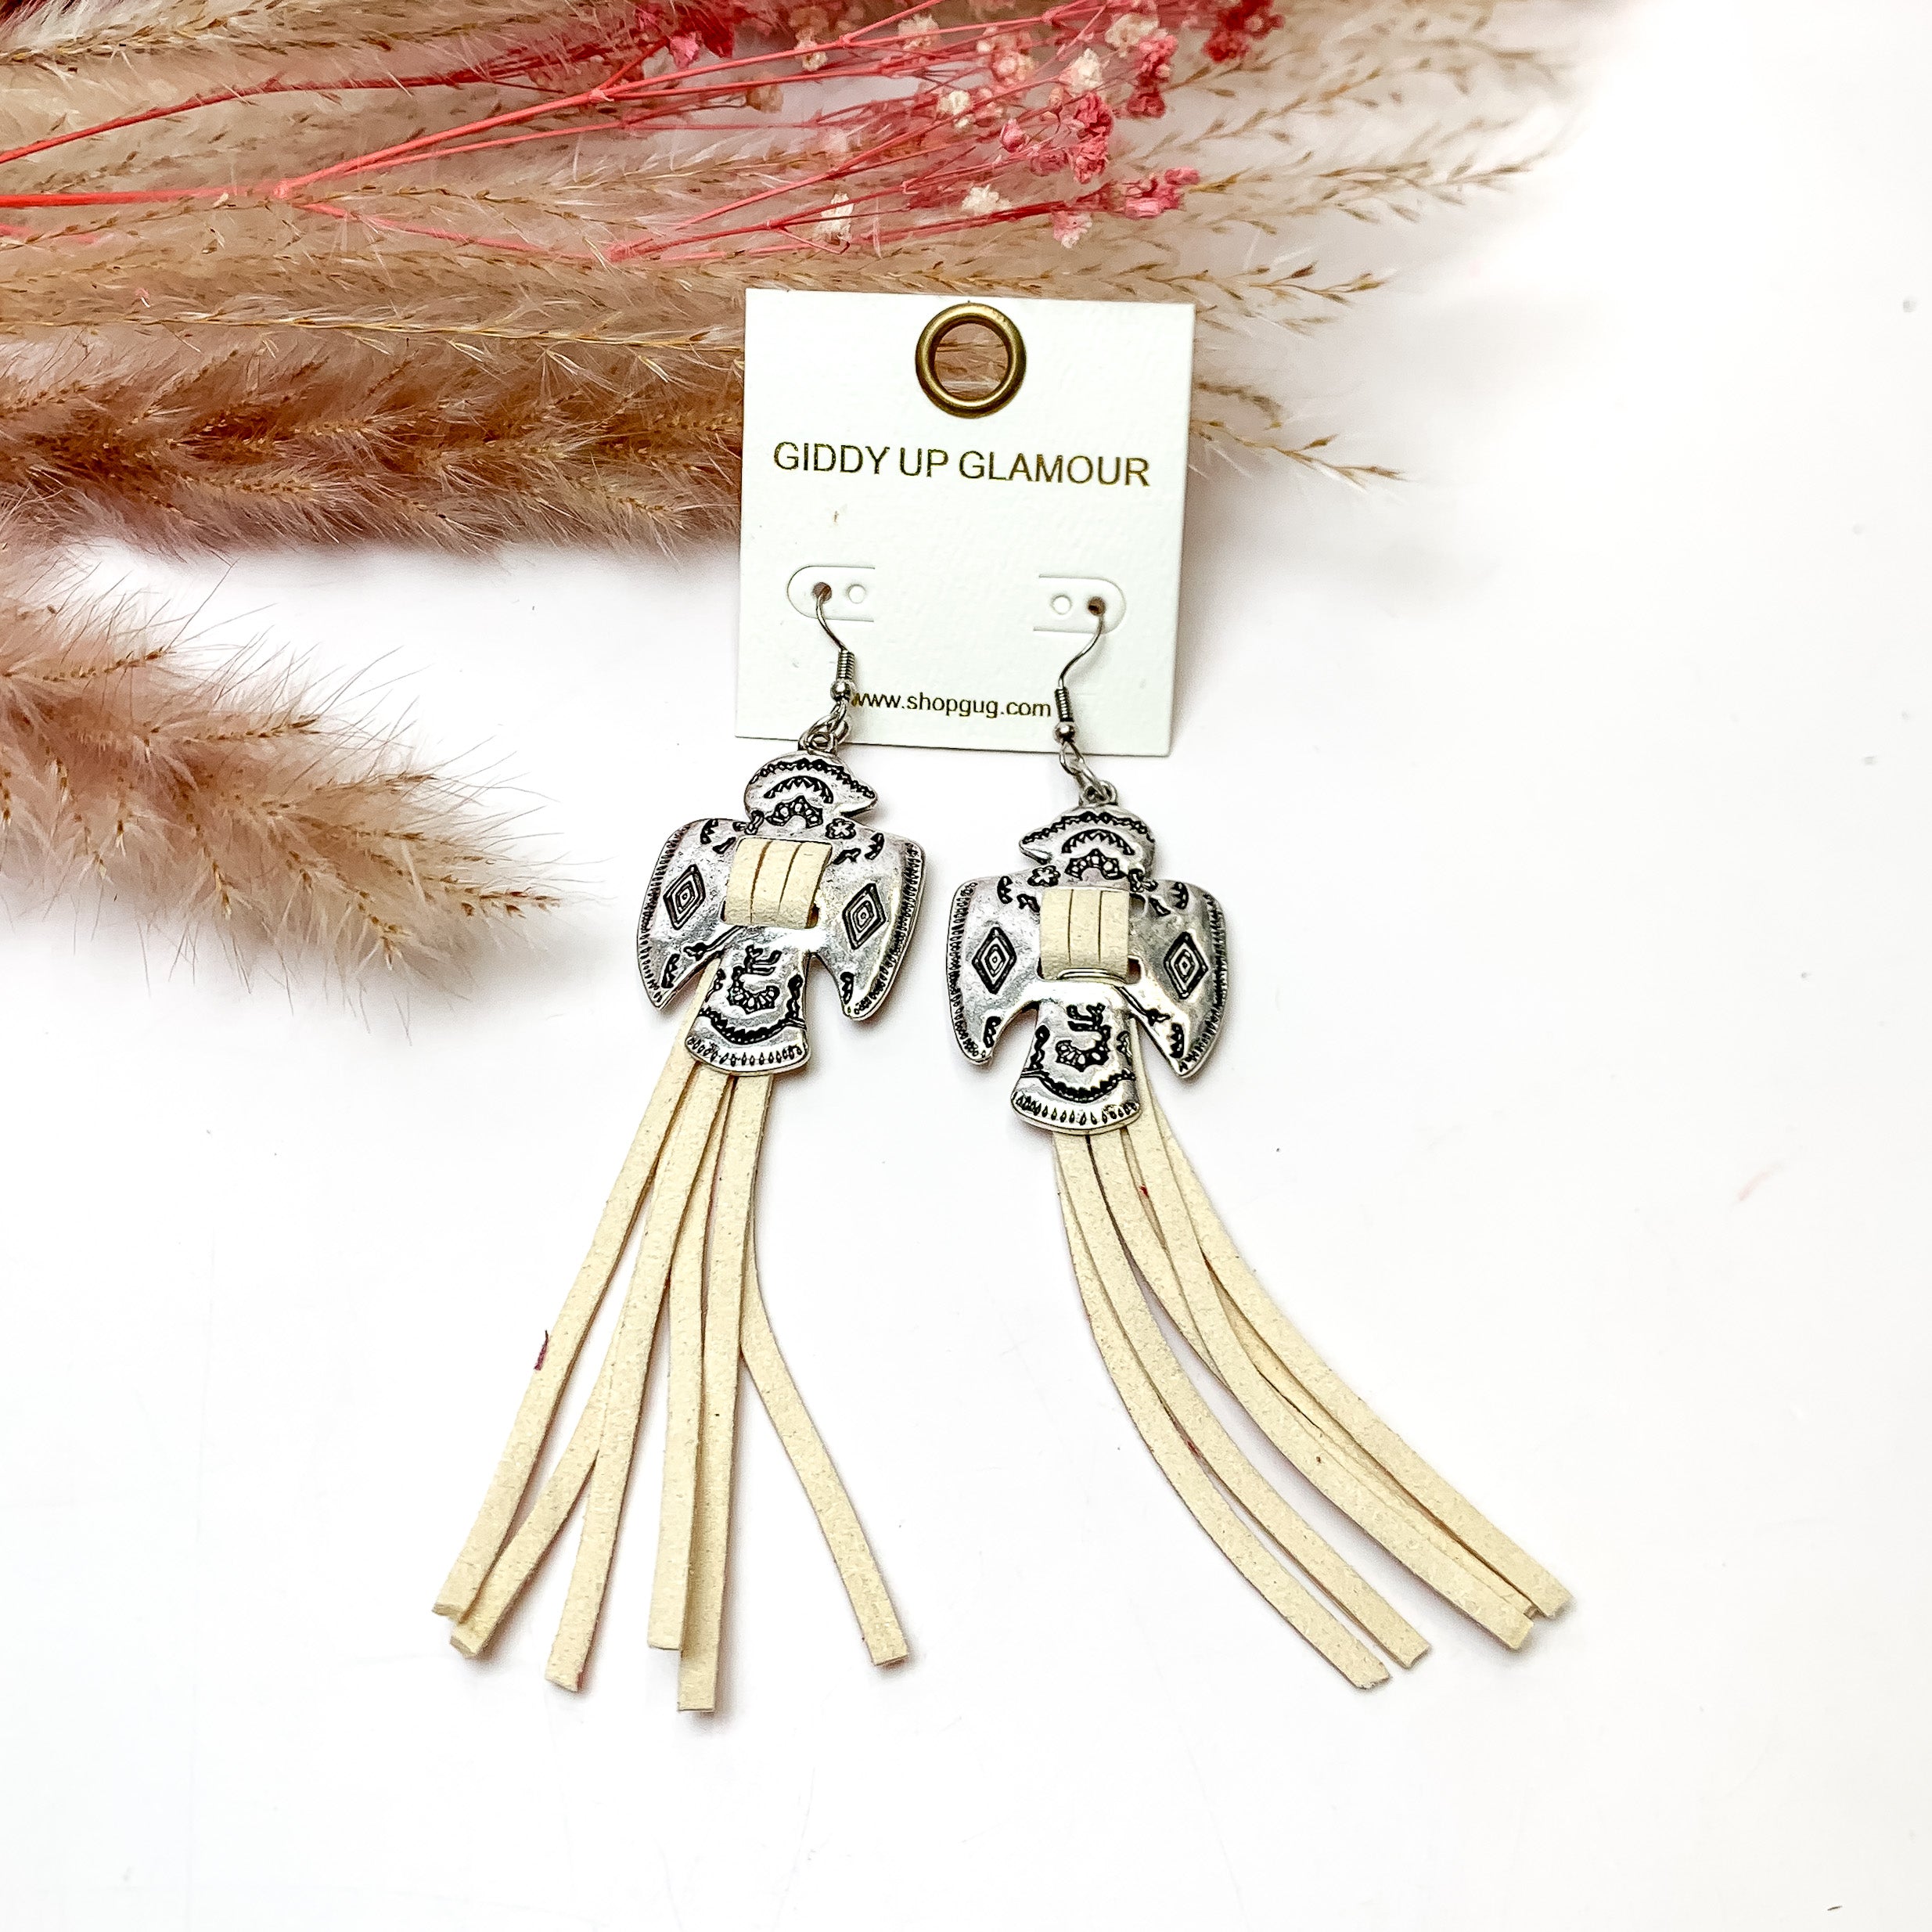 Thunderbird Tassel Earrings in Ivory. These earrings are pictured on a white background with flowers behind for decoration.